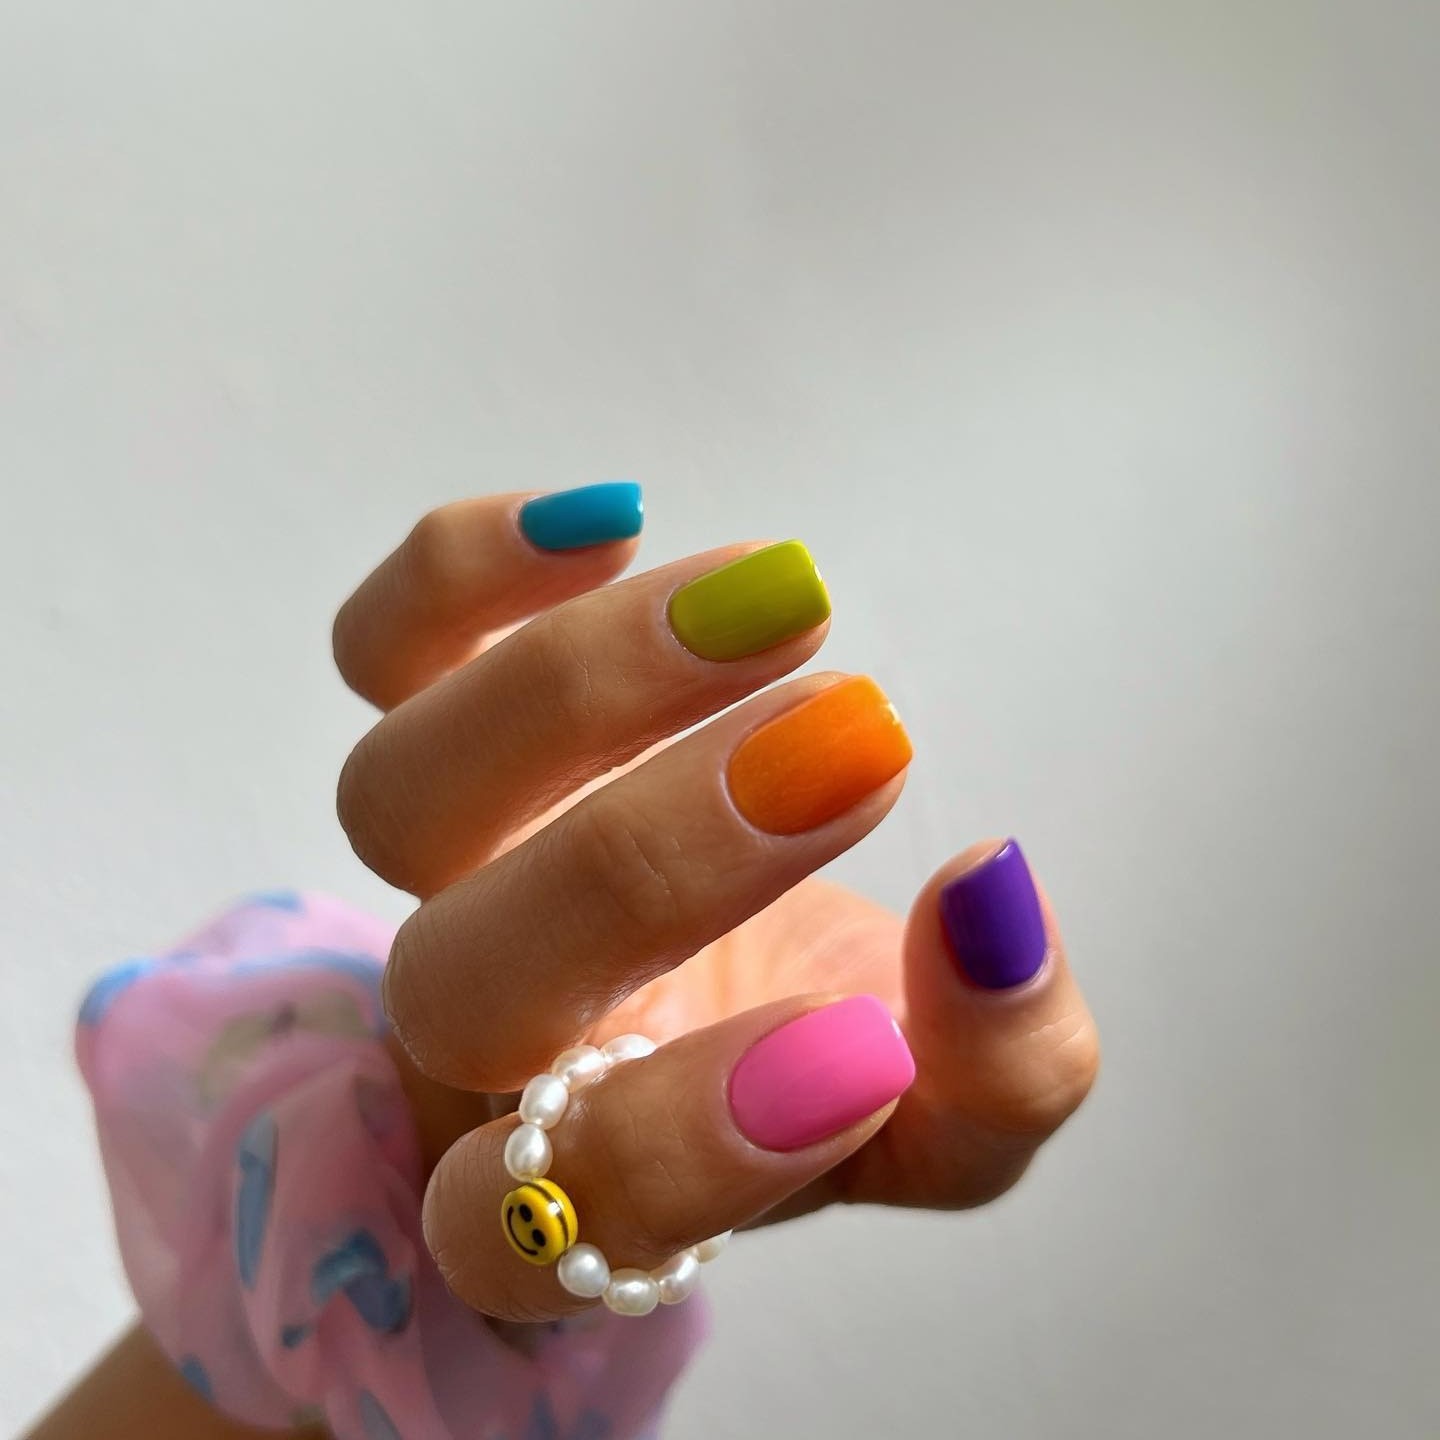 Calling It! This Playful Nail Trend Is Poised to Dominate This Summer